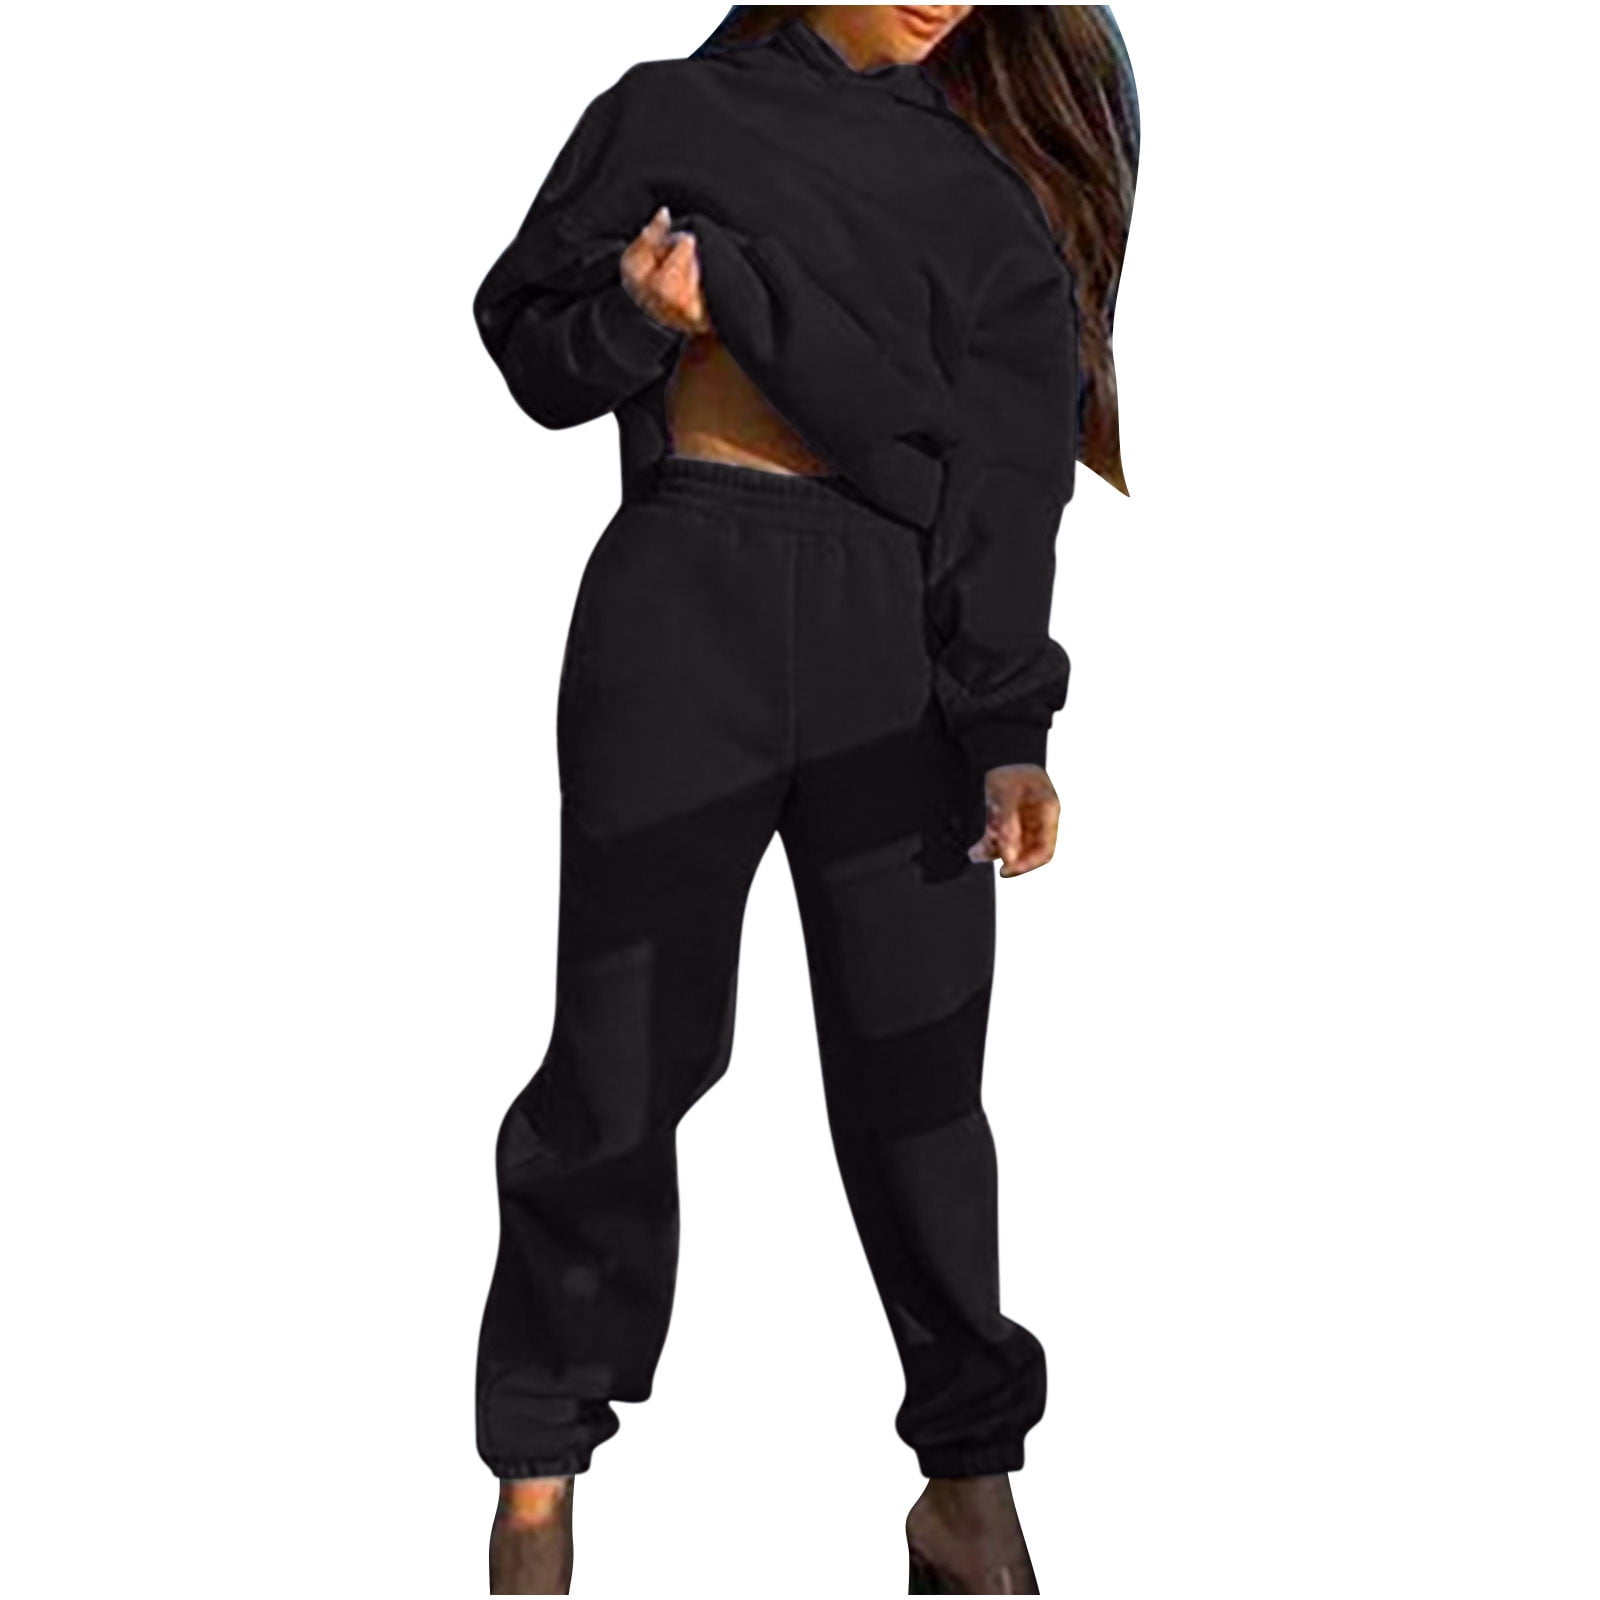 RQYYD Womens Tracksuit Sets 2 Piece Sweatsuits Hoodies Solid Color Hooded  Sweatshirts & Sweatpants Jogging Suits Outfits Lounge Sets Black S